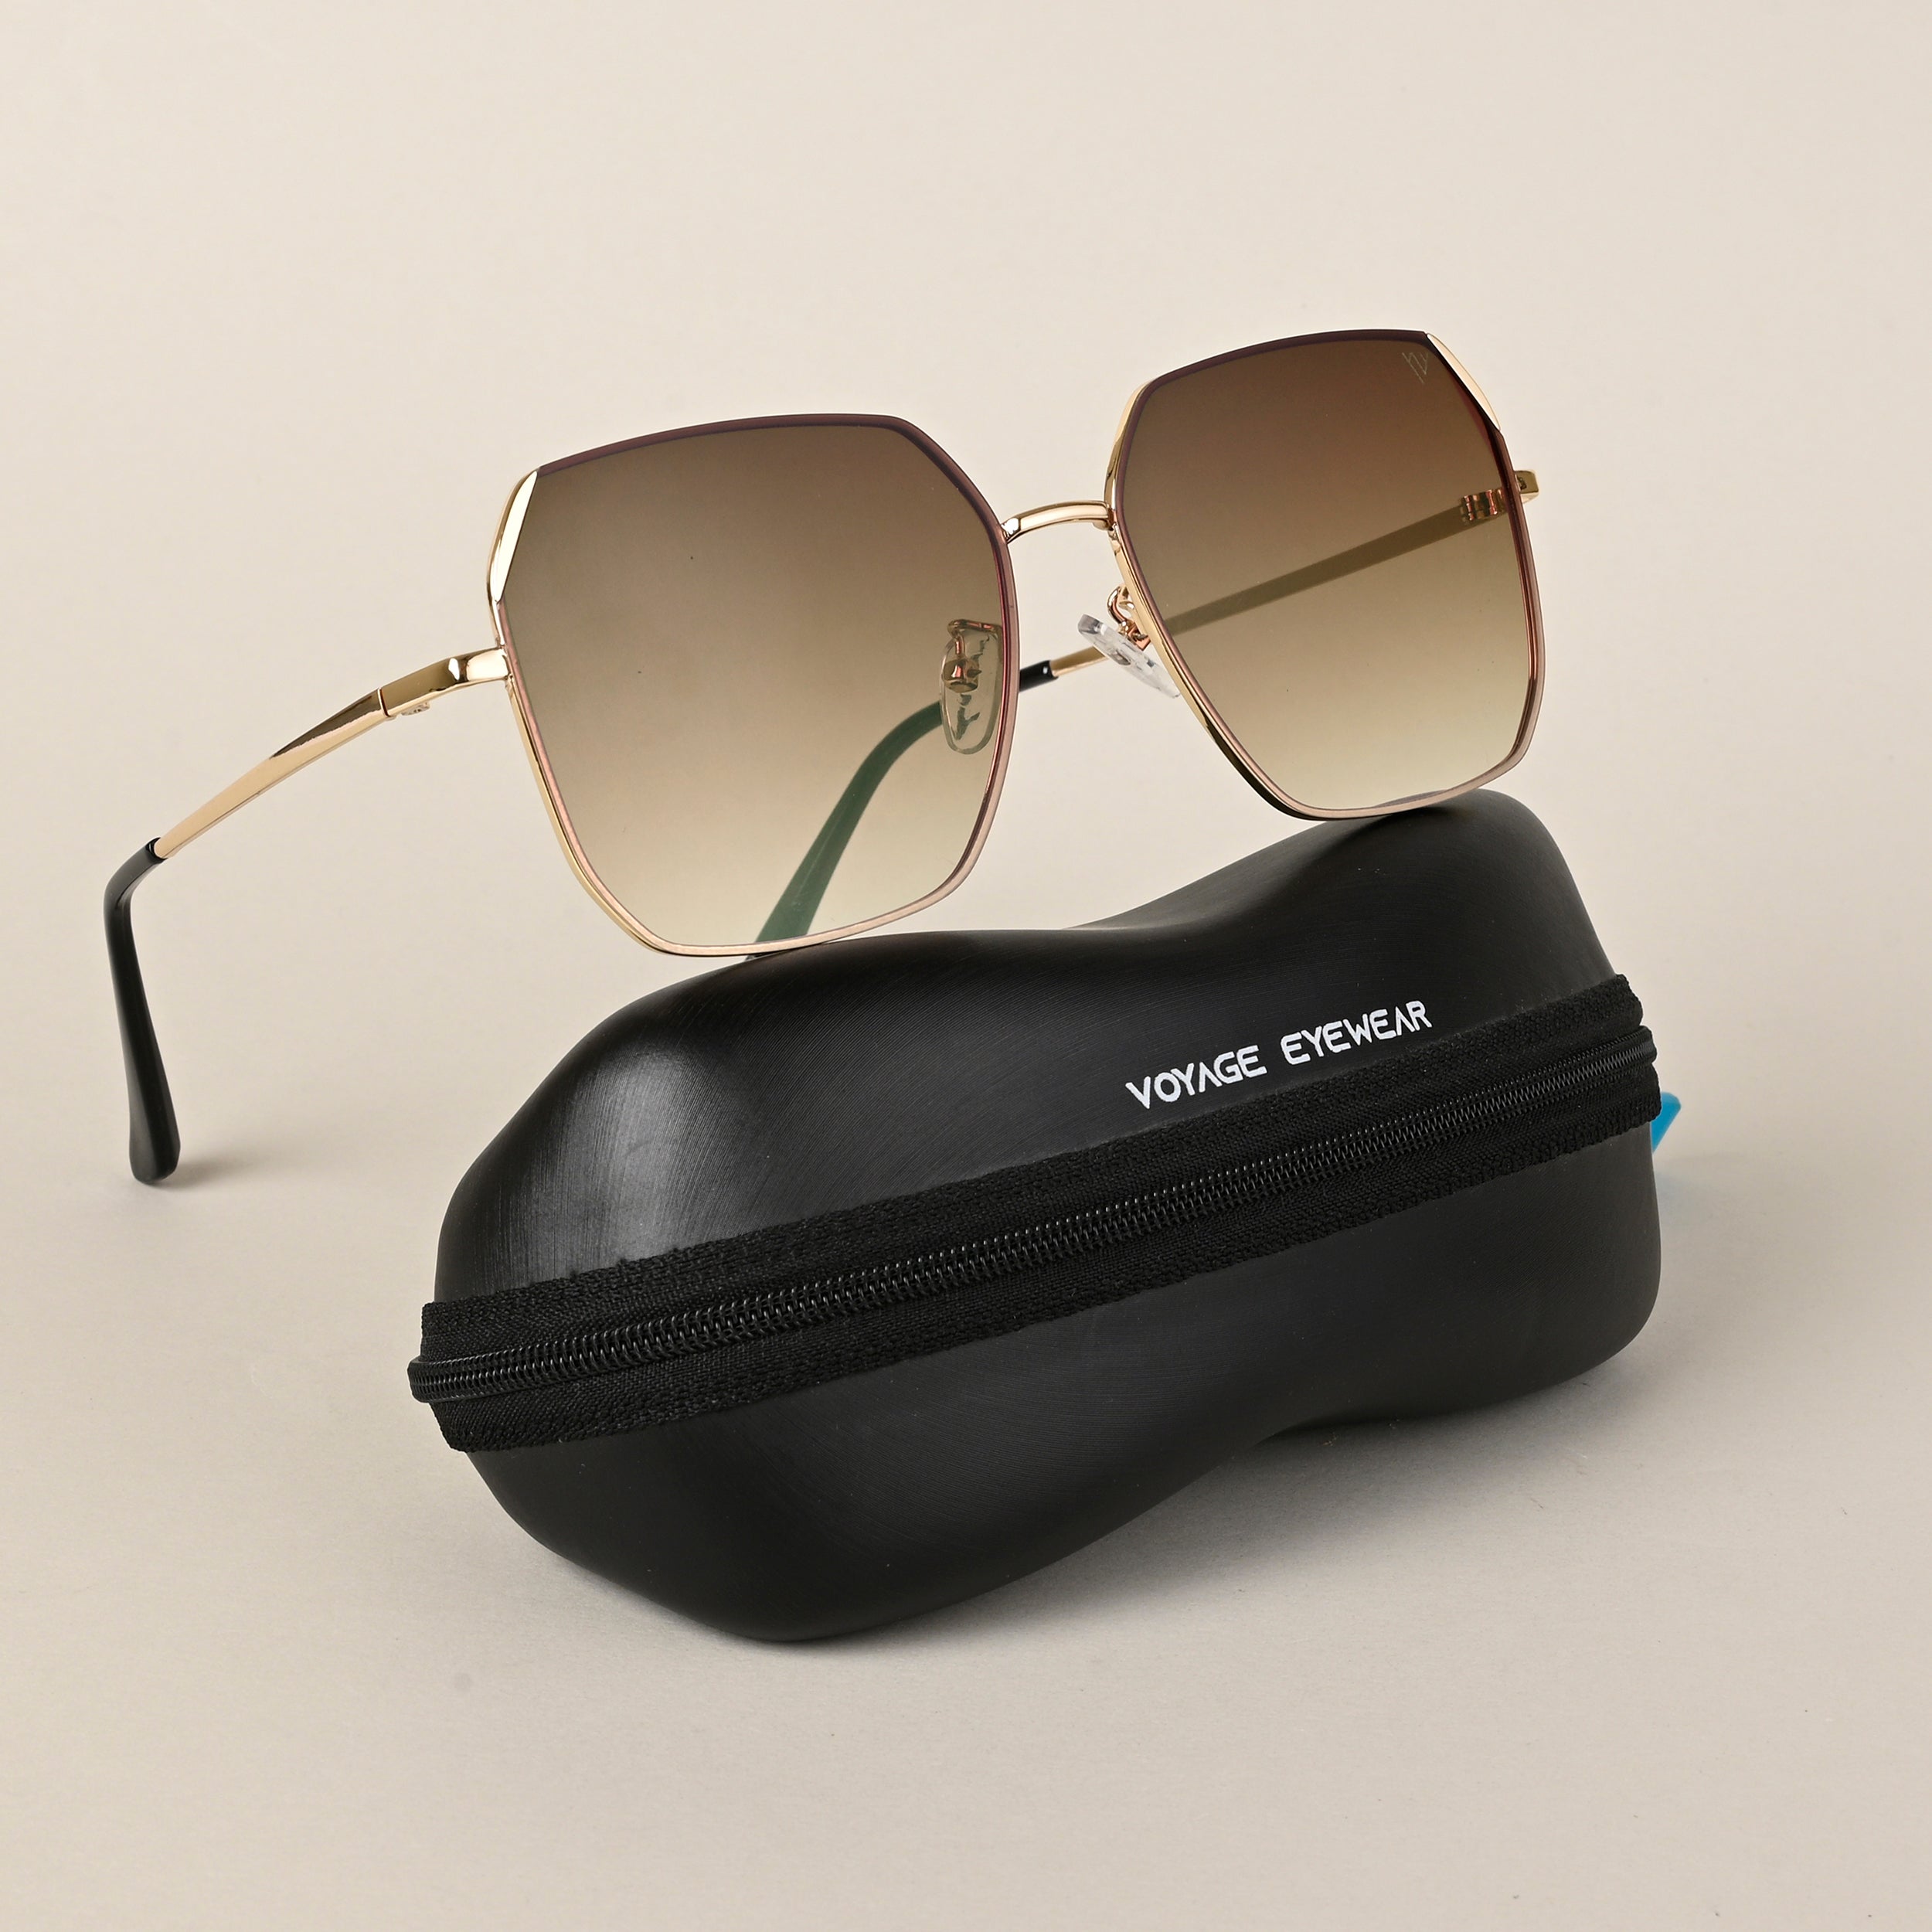 Voyage Brown Square Sunglasses for Men & Women (450MG4338)